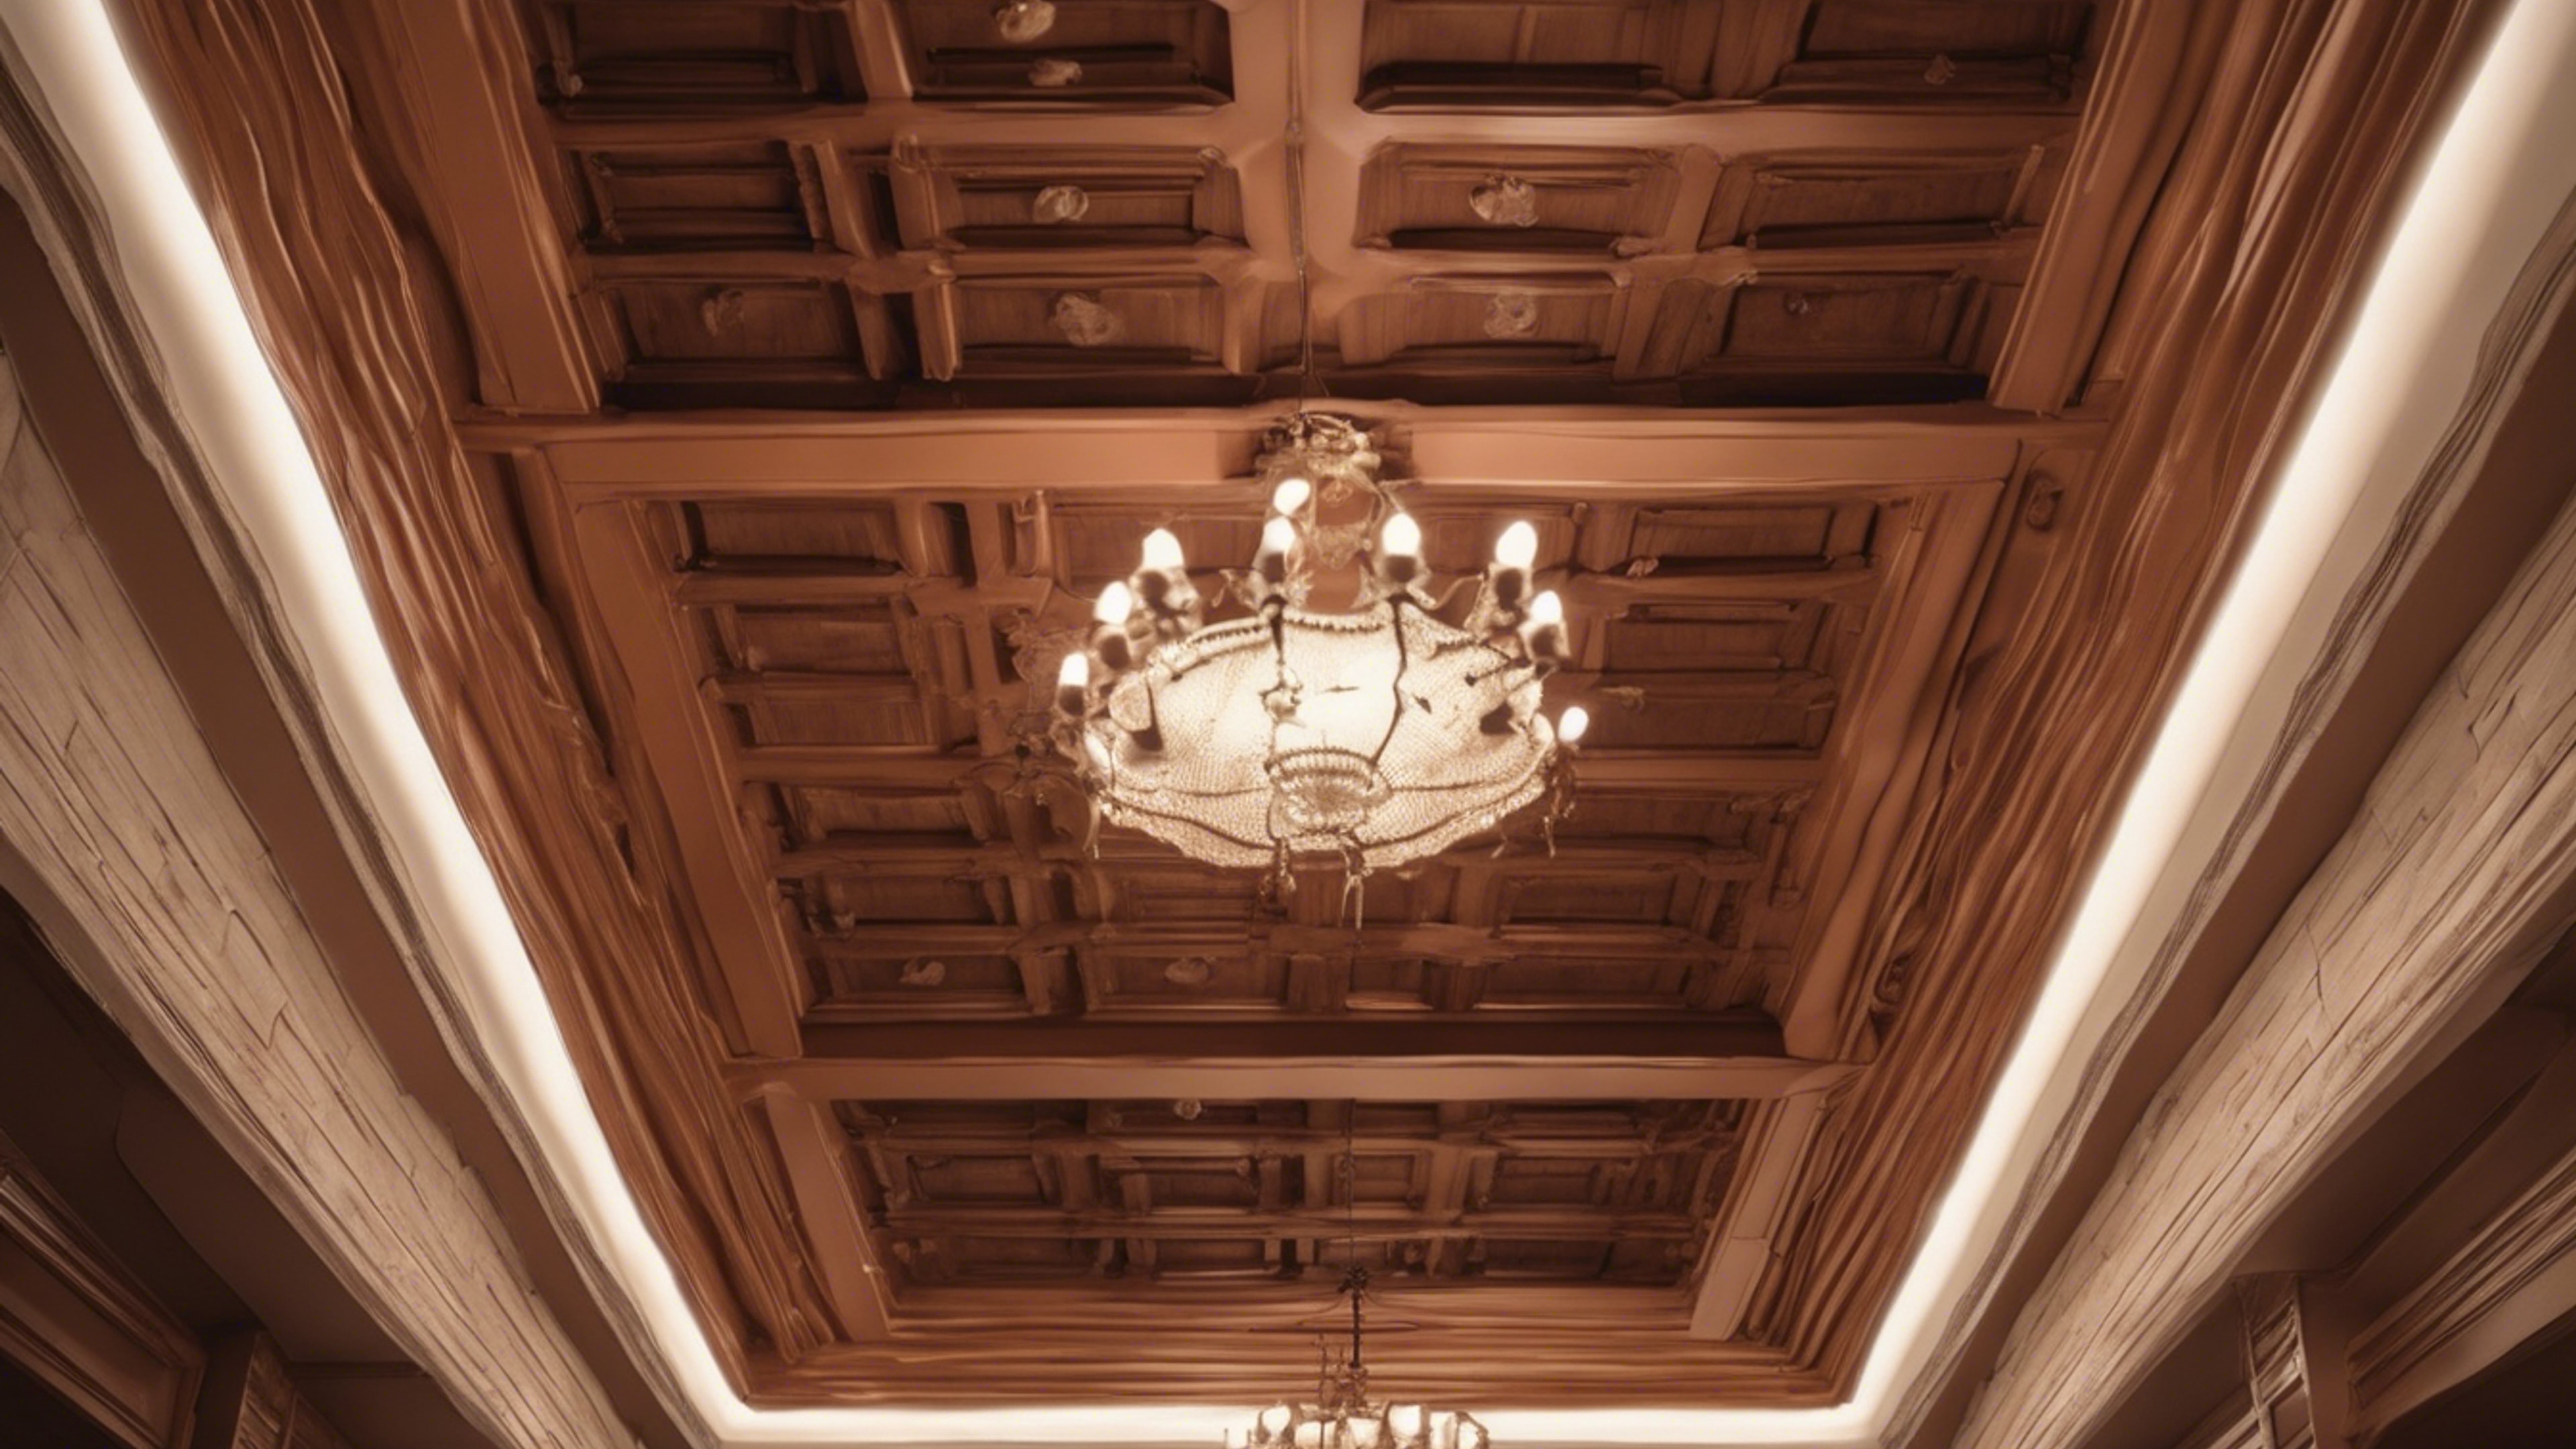 A warm brown coffered ceiling room decorated in traditional style 벽지[0b856da927b2485ba9d5]